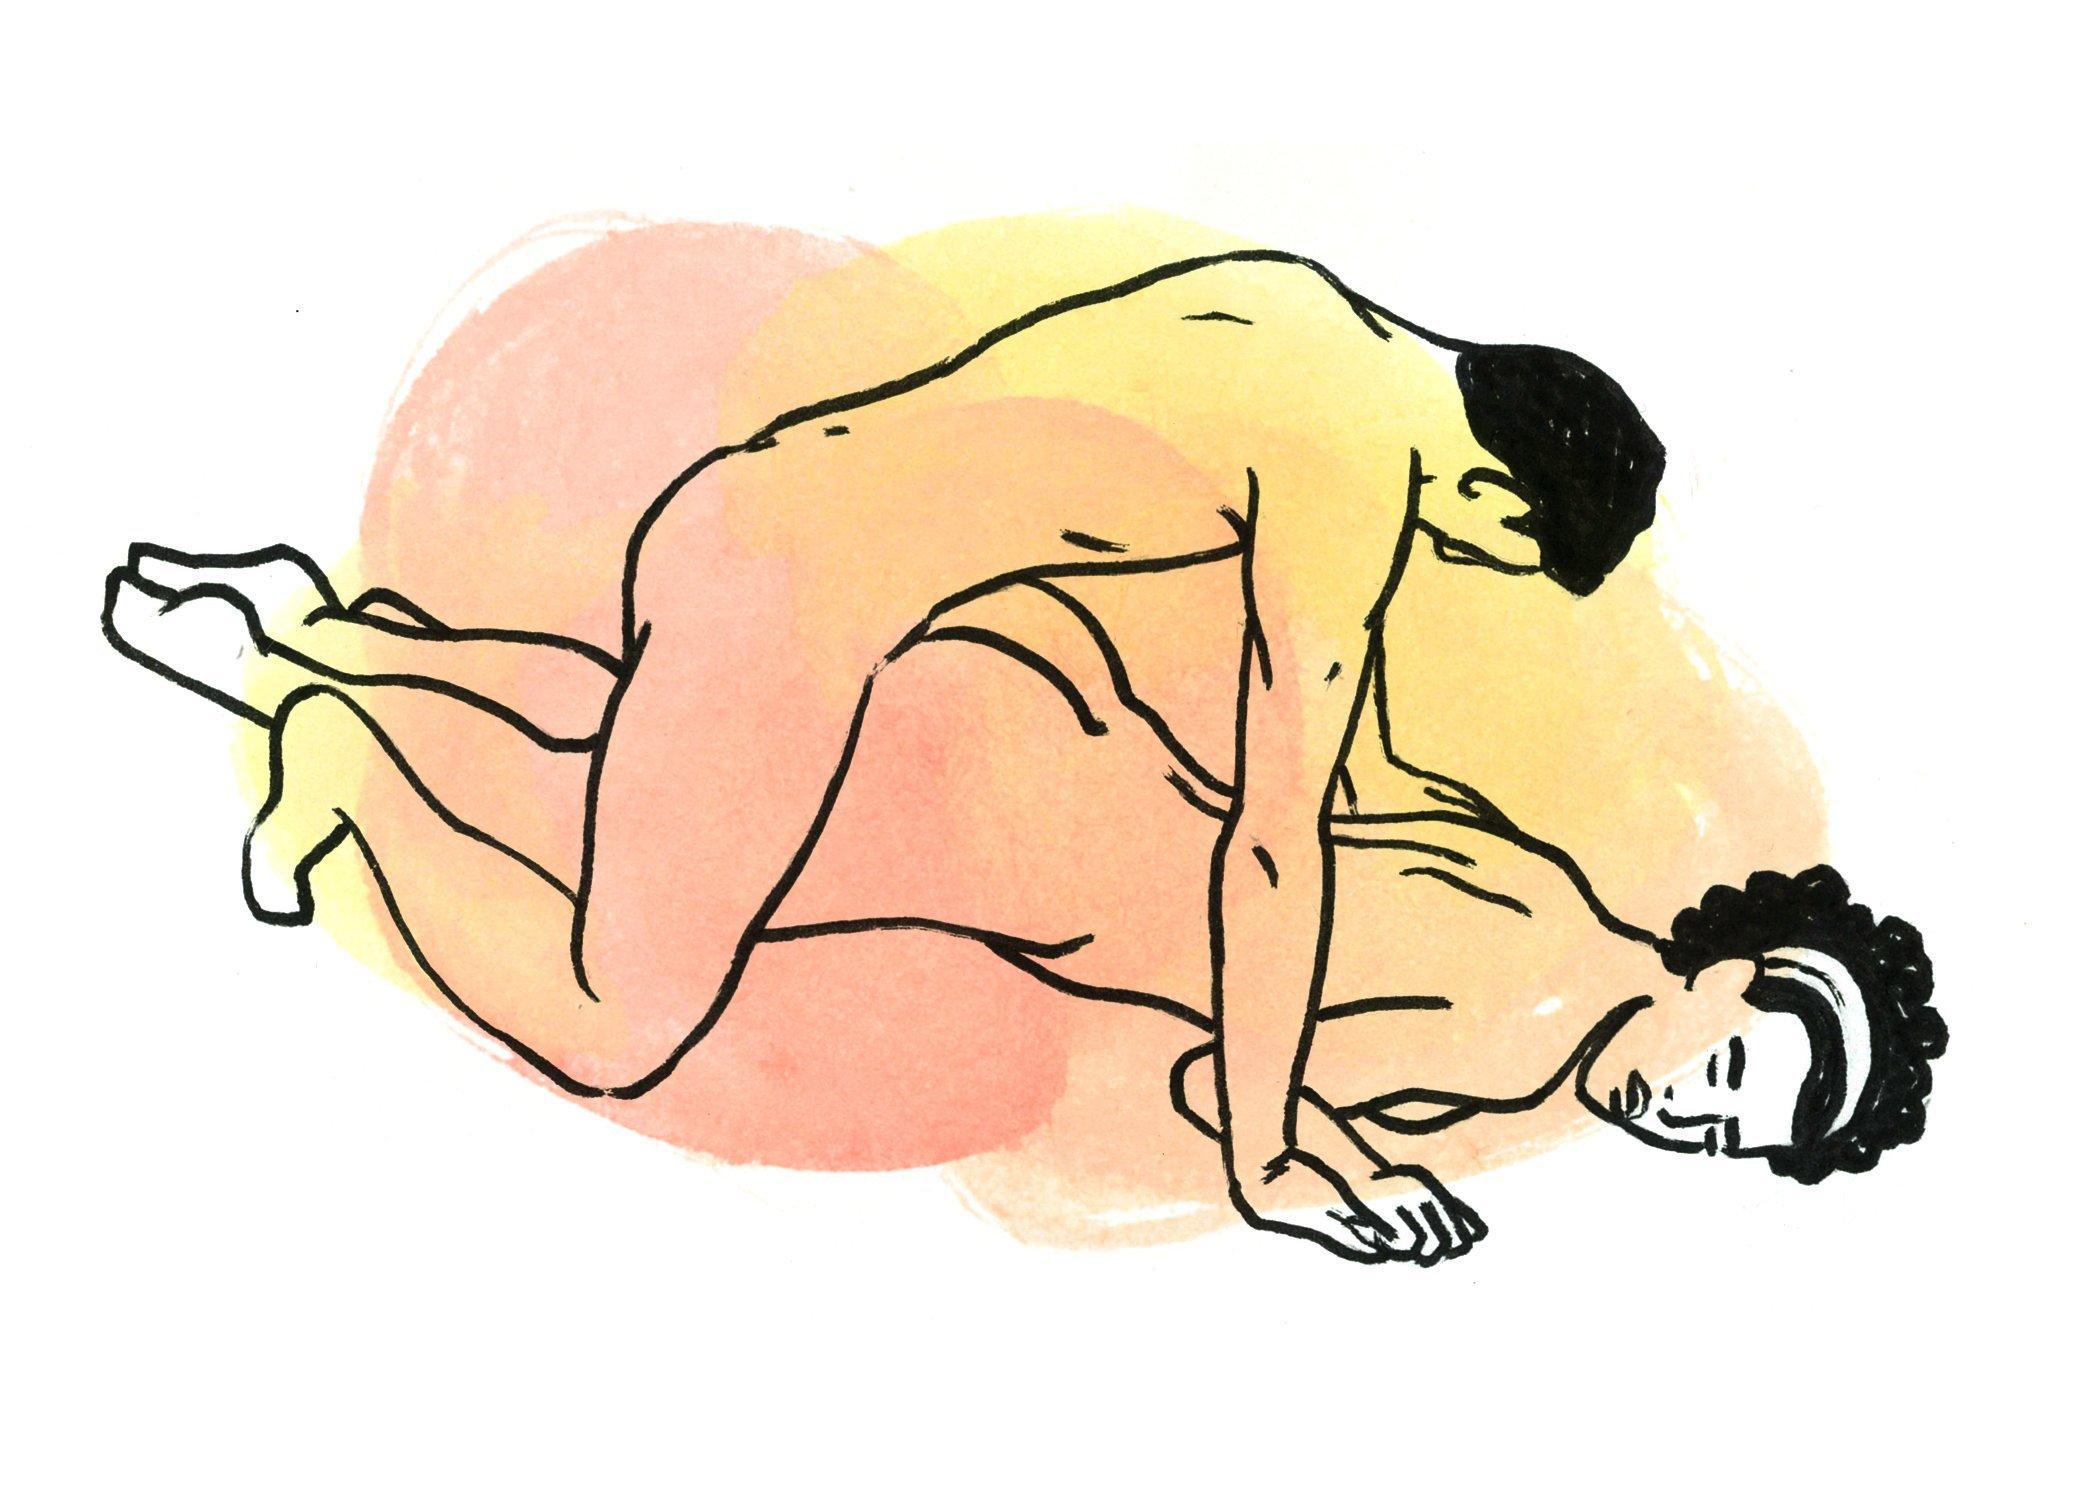 For sex dicks with small positions guys The surprising